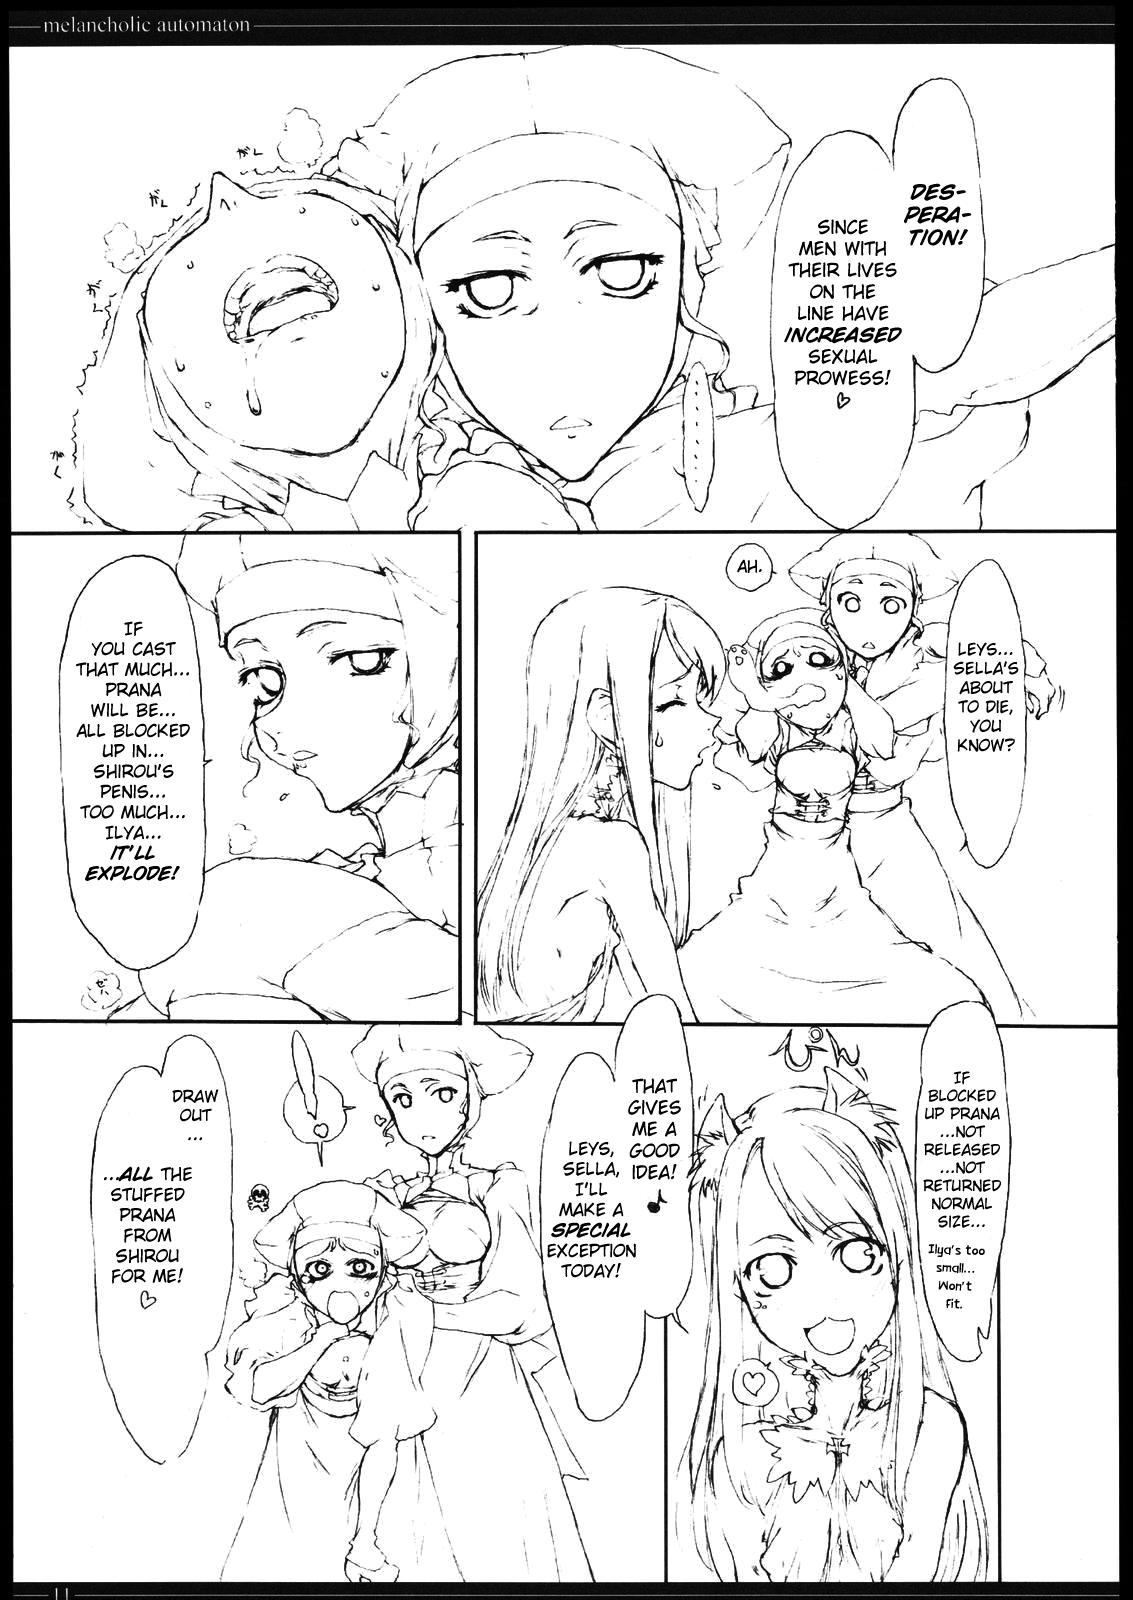 Art Melancholic Automaton - One day at the castle of Einzbern - Fate stay night Masturbate - Page 10